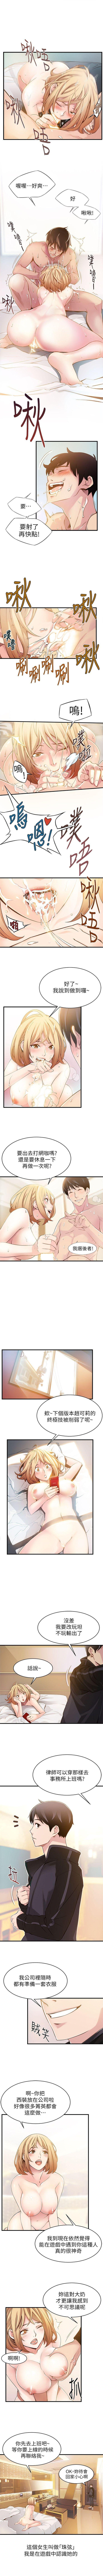 Thot 弱點 1-94 官方中文（連載中） Uncensored - Page 3